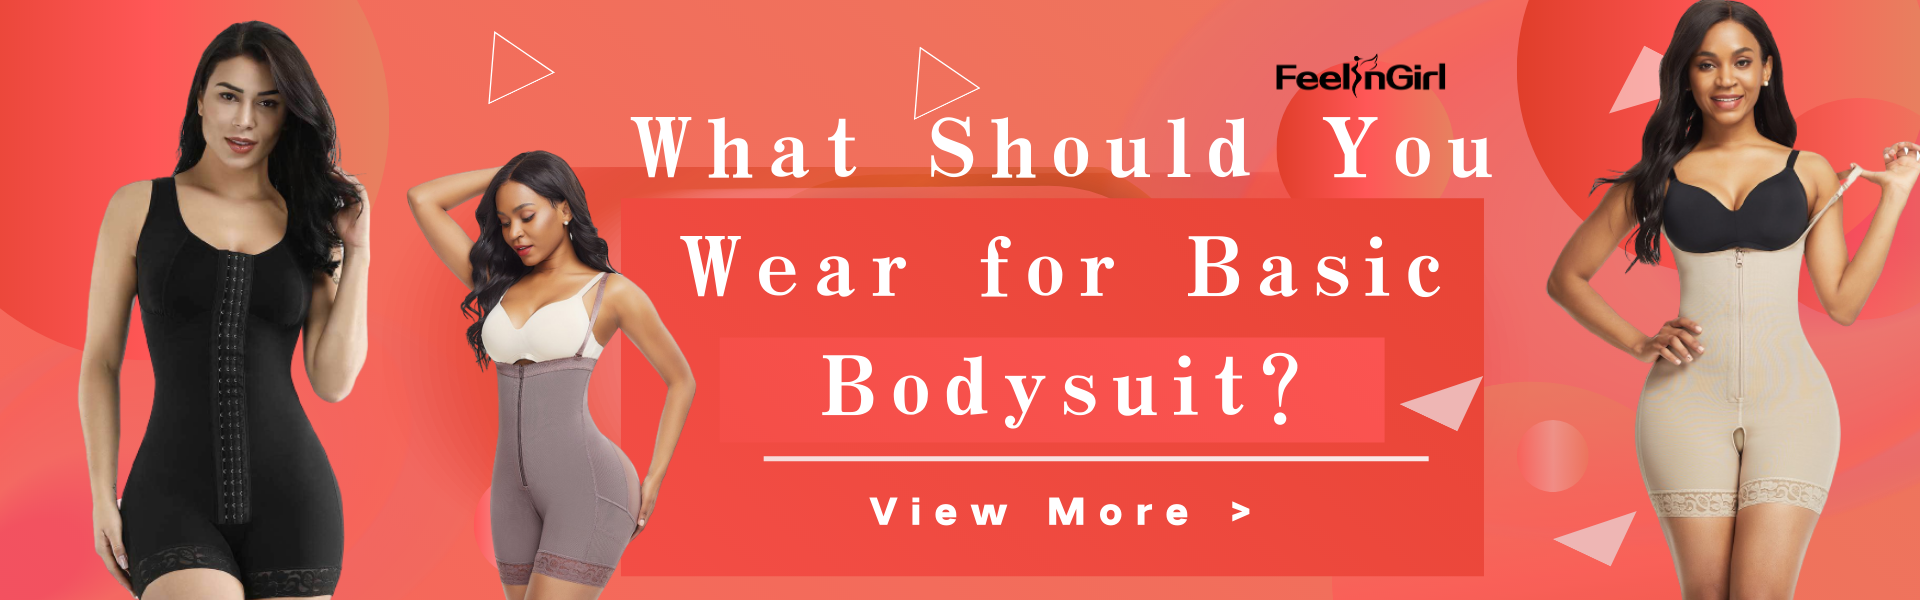 What Should You Wear for Basic Bodysuit?